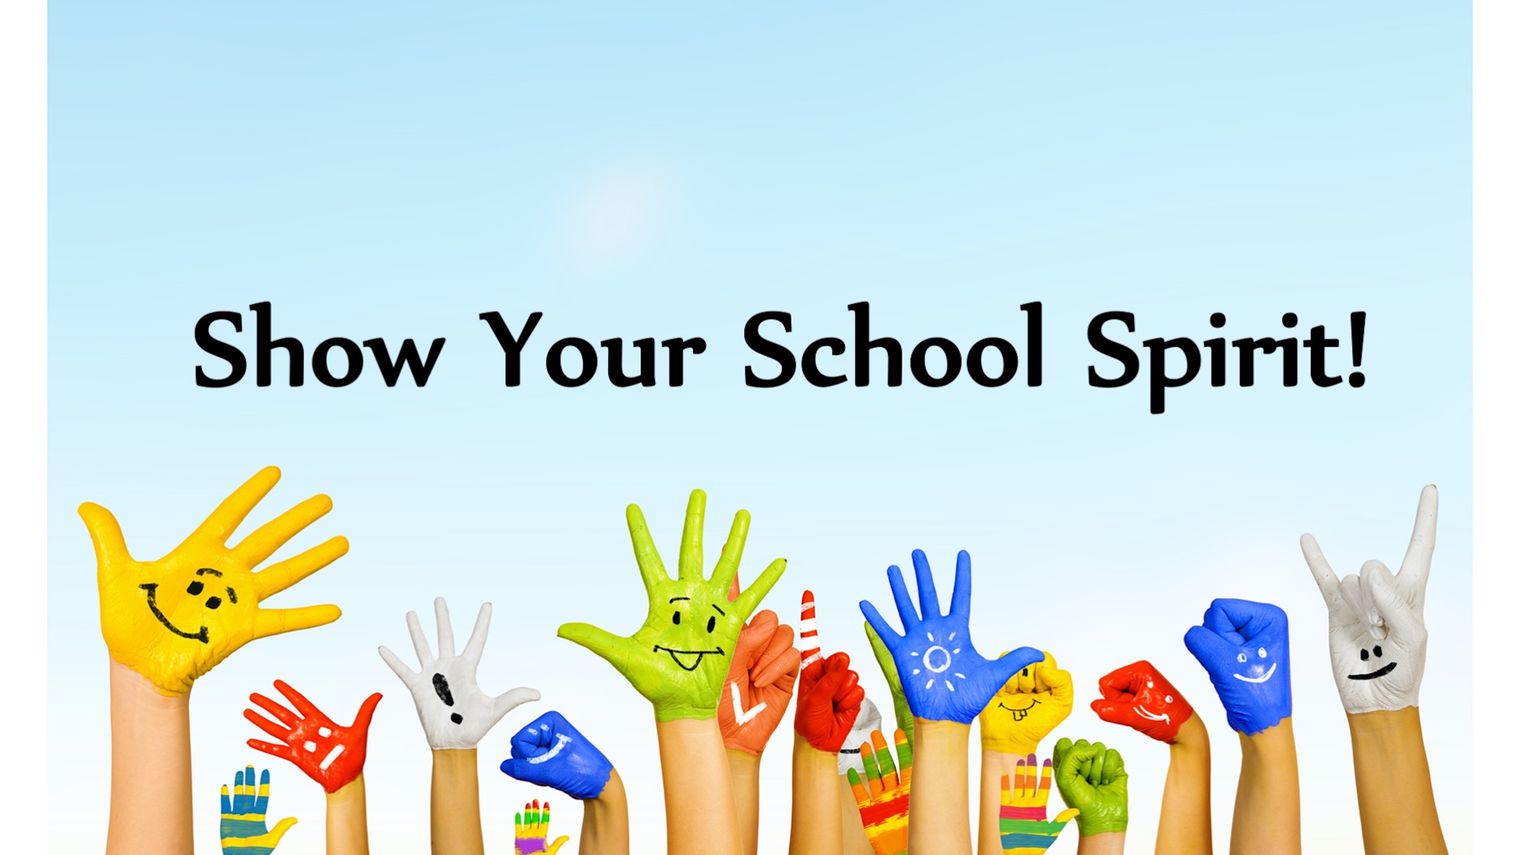 Show Your School Spirit above colorful painted hands